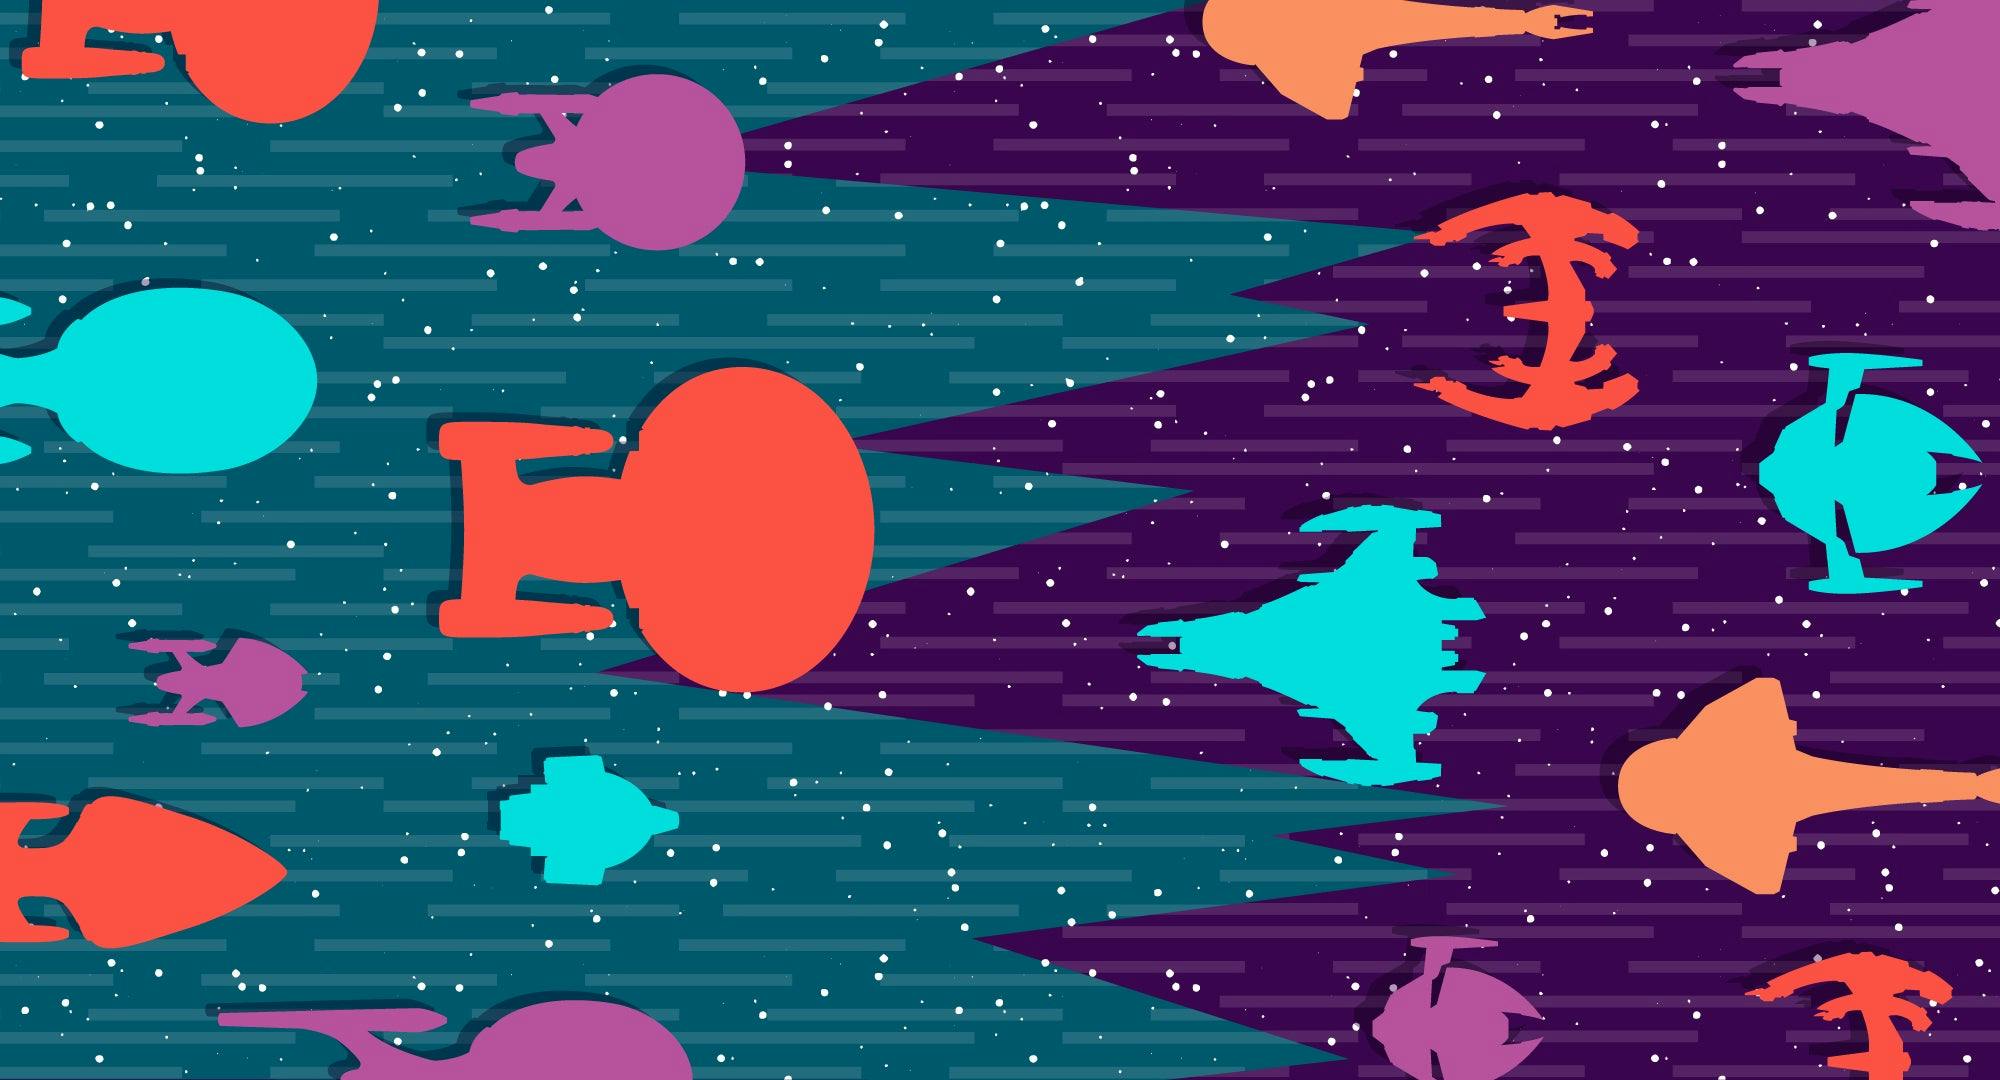 Illustrated banner featuring Federation starships and Dominion ships